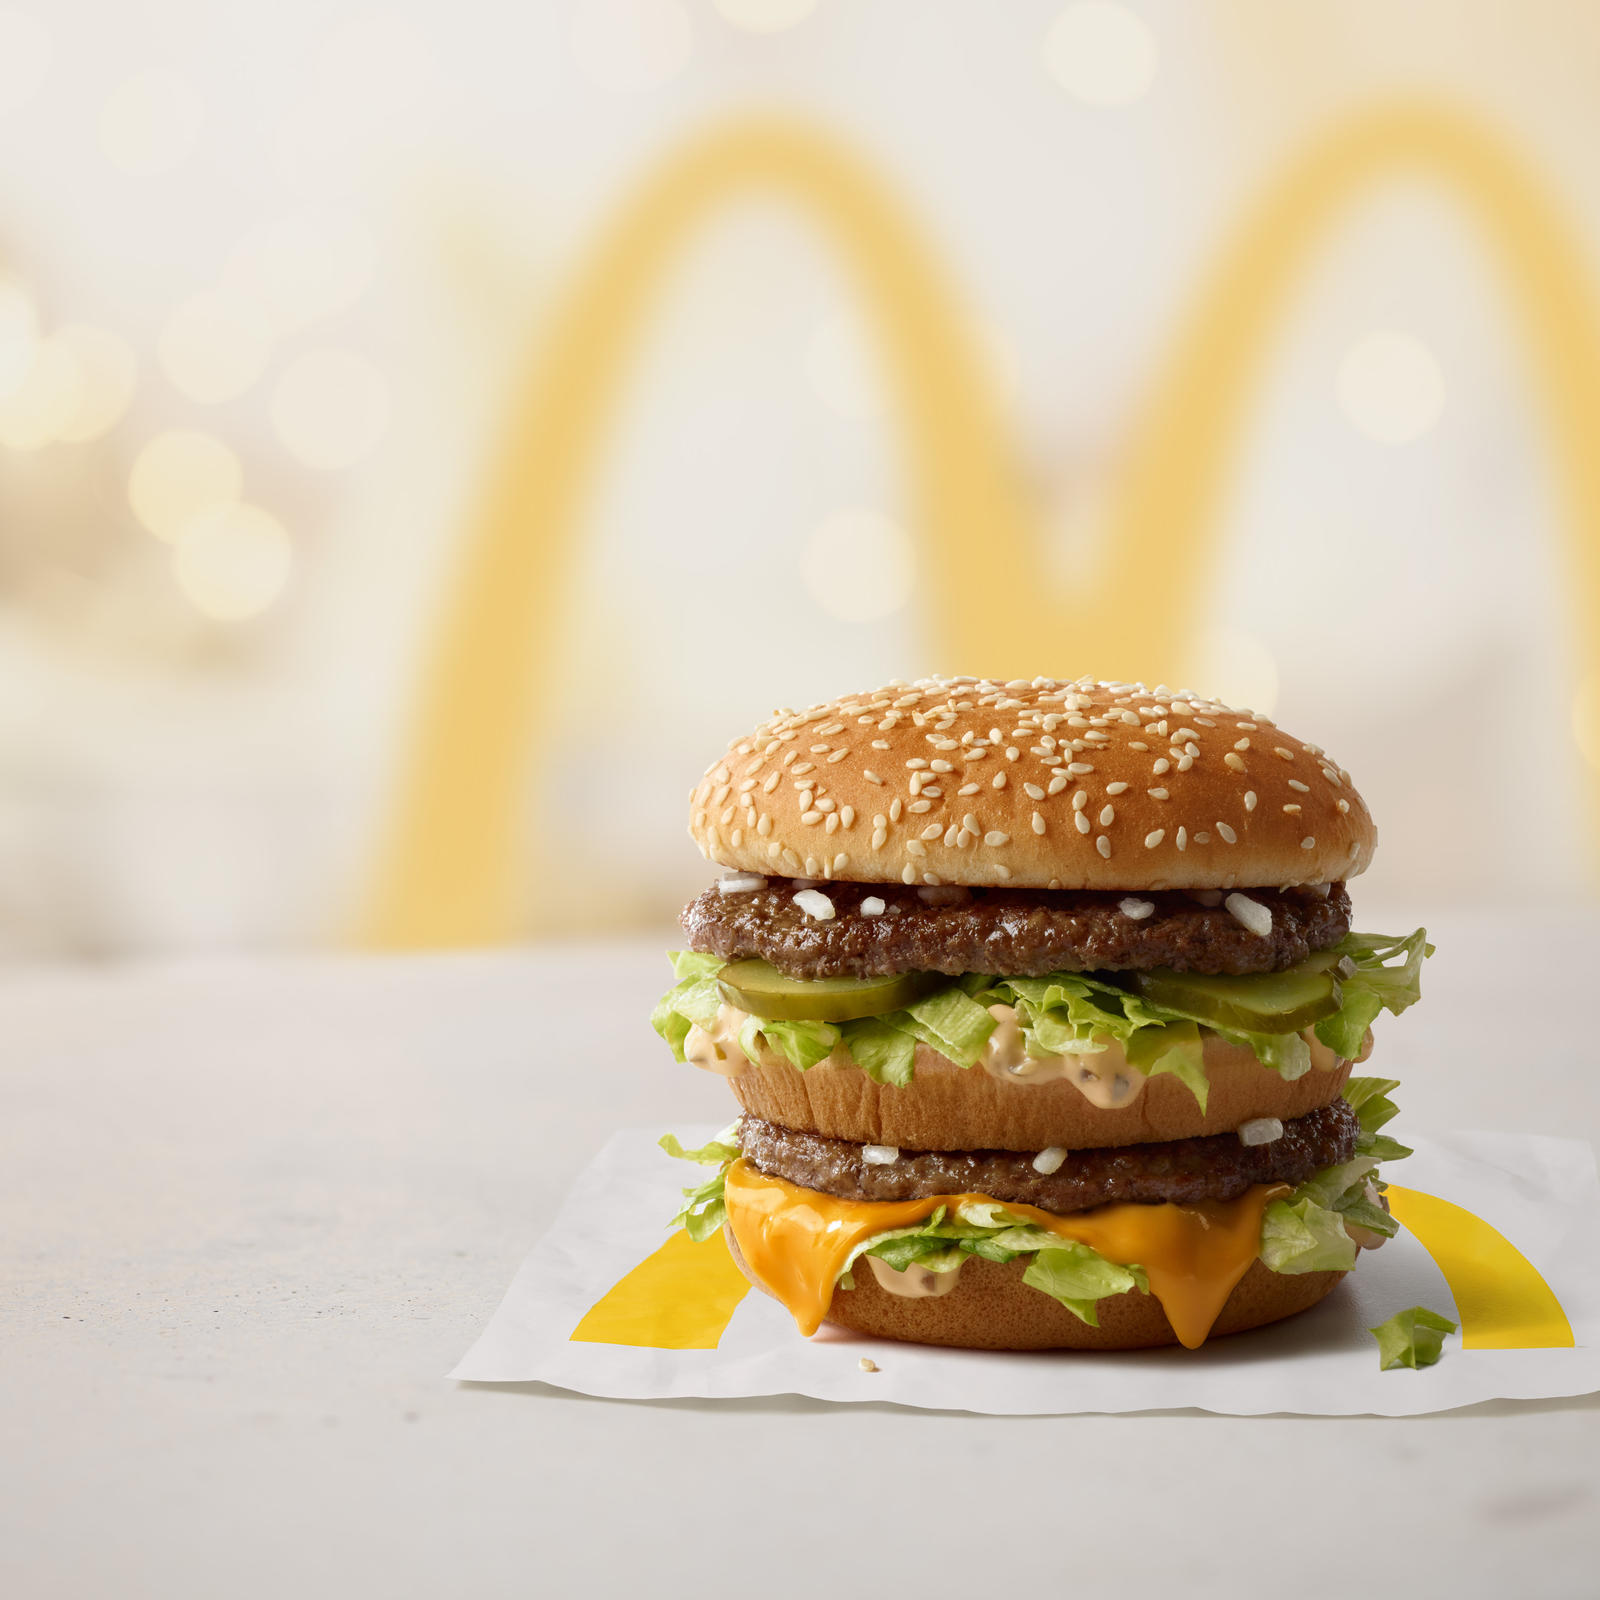 inflation is still on the menu at fast-food chains. here's why.